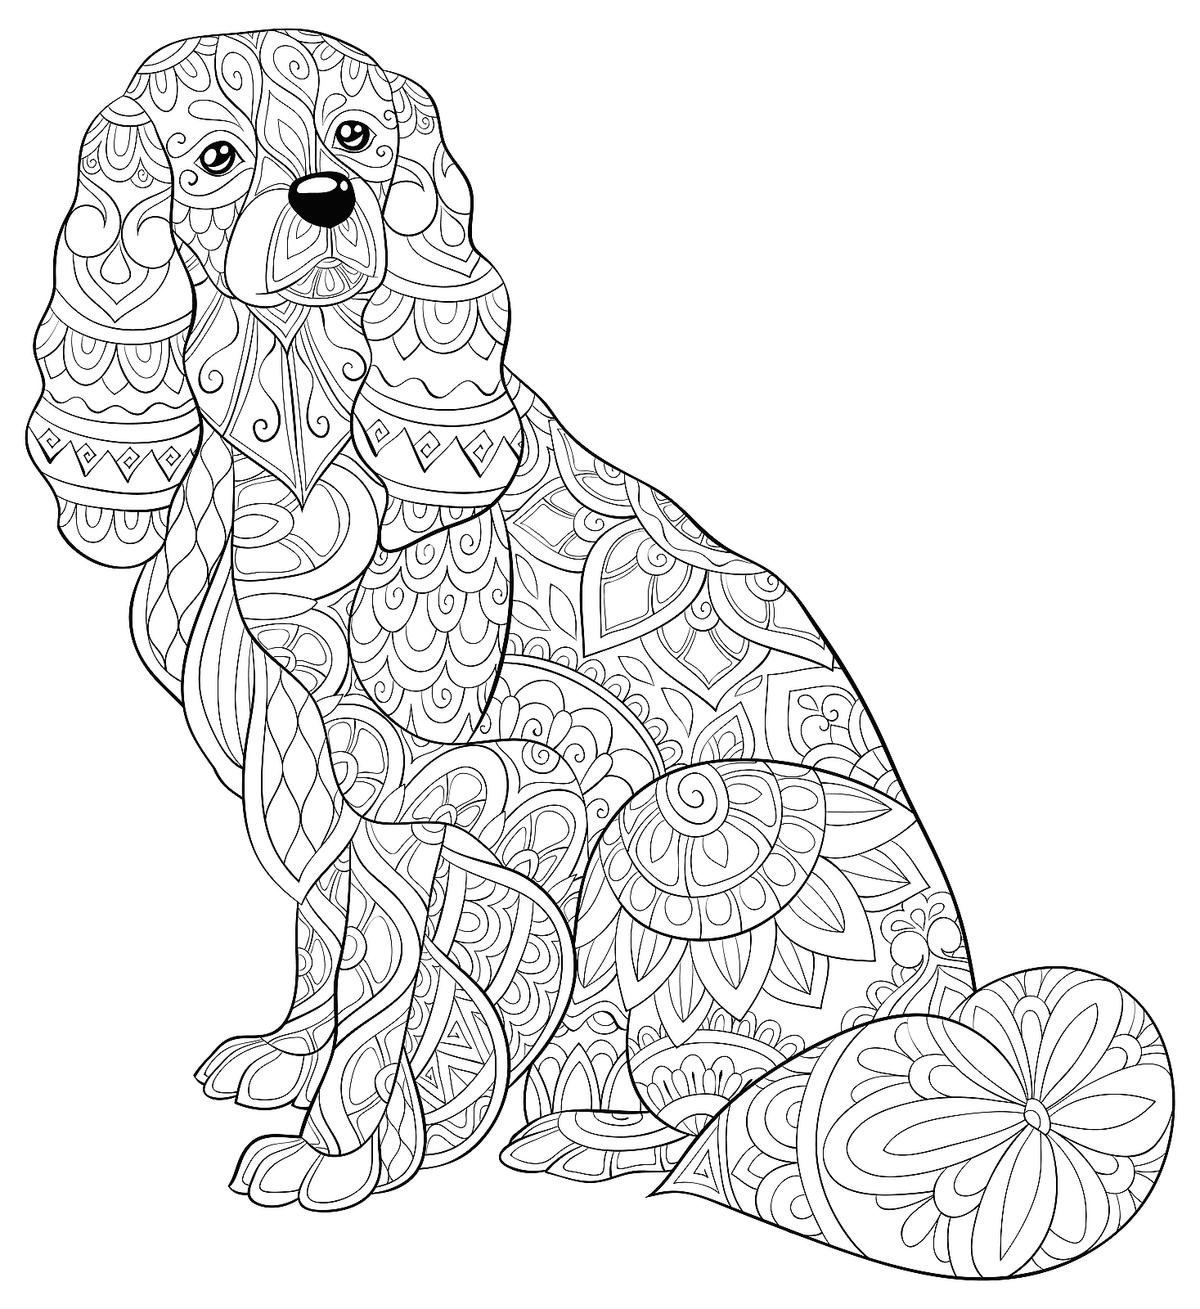 Dog coloring pages free printable coloring pages of dogs for dog lovers of all ages printables mom